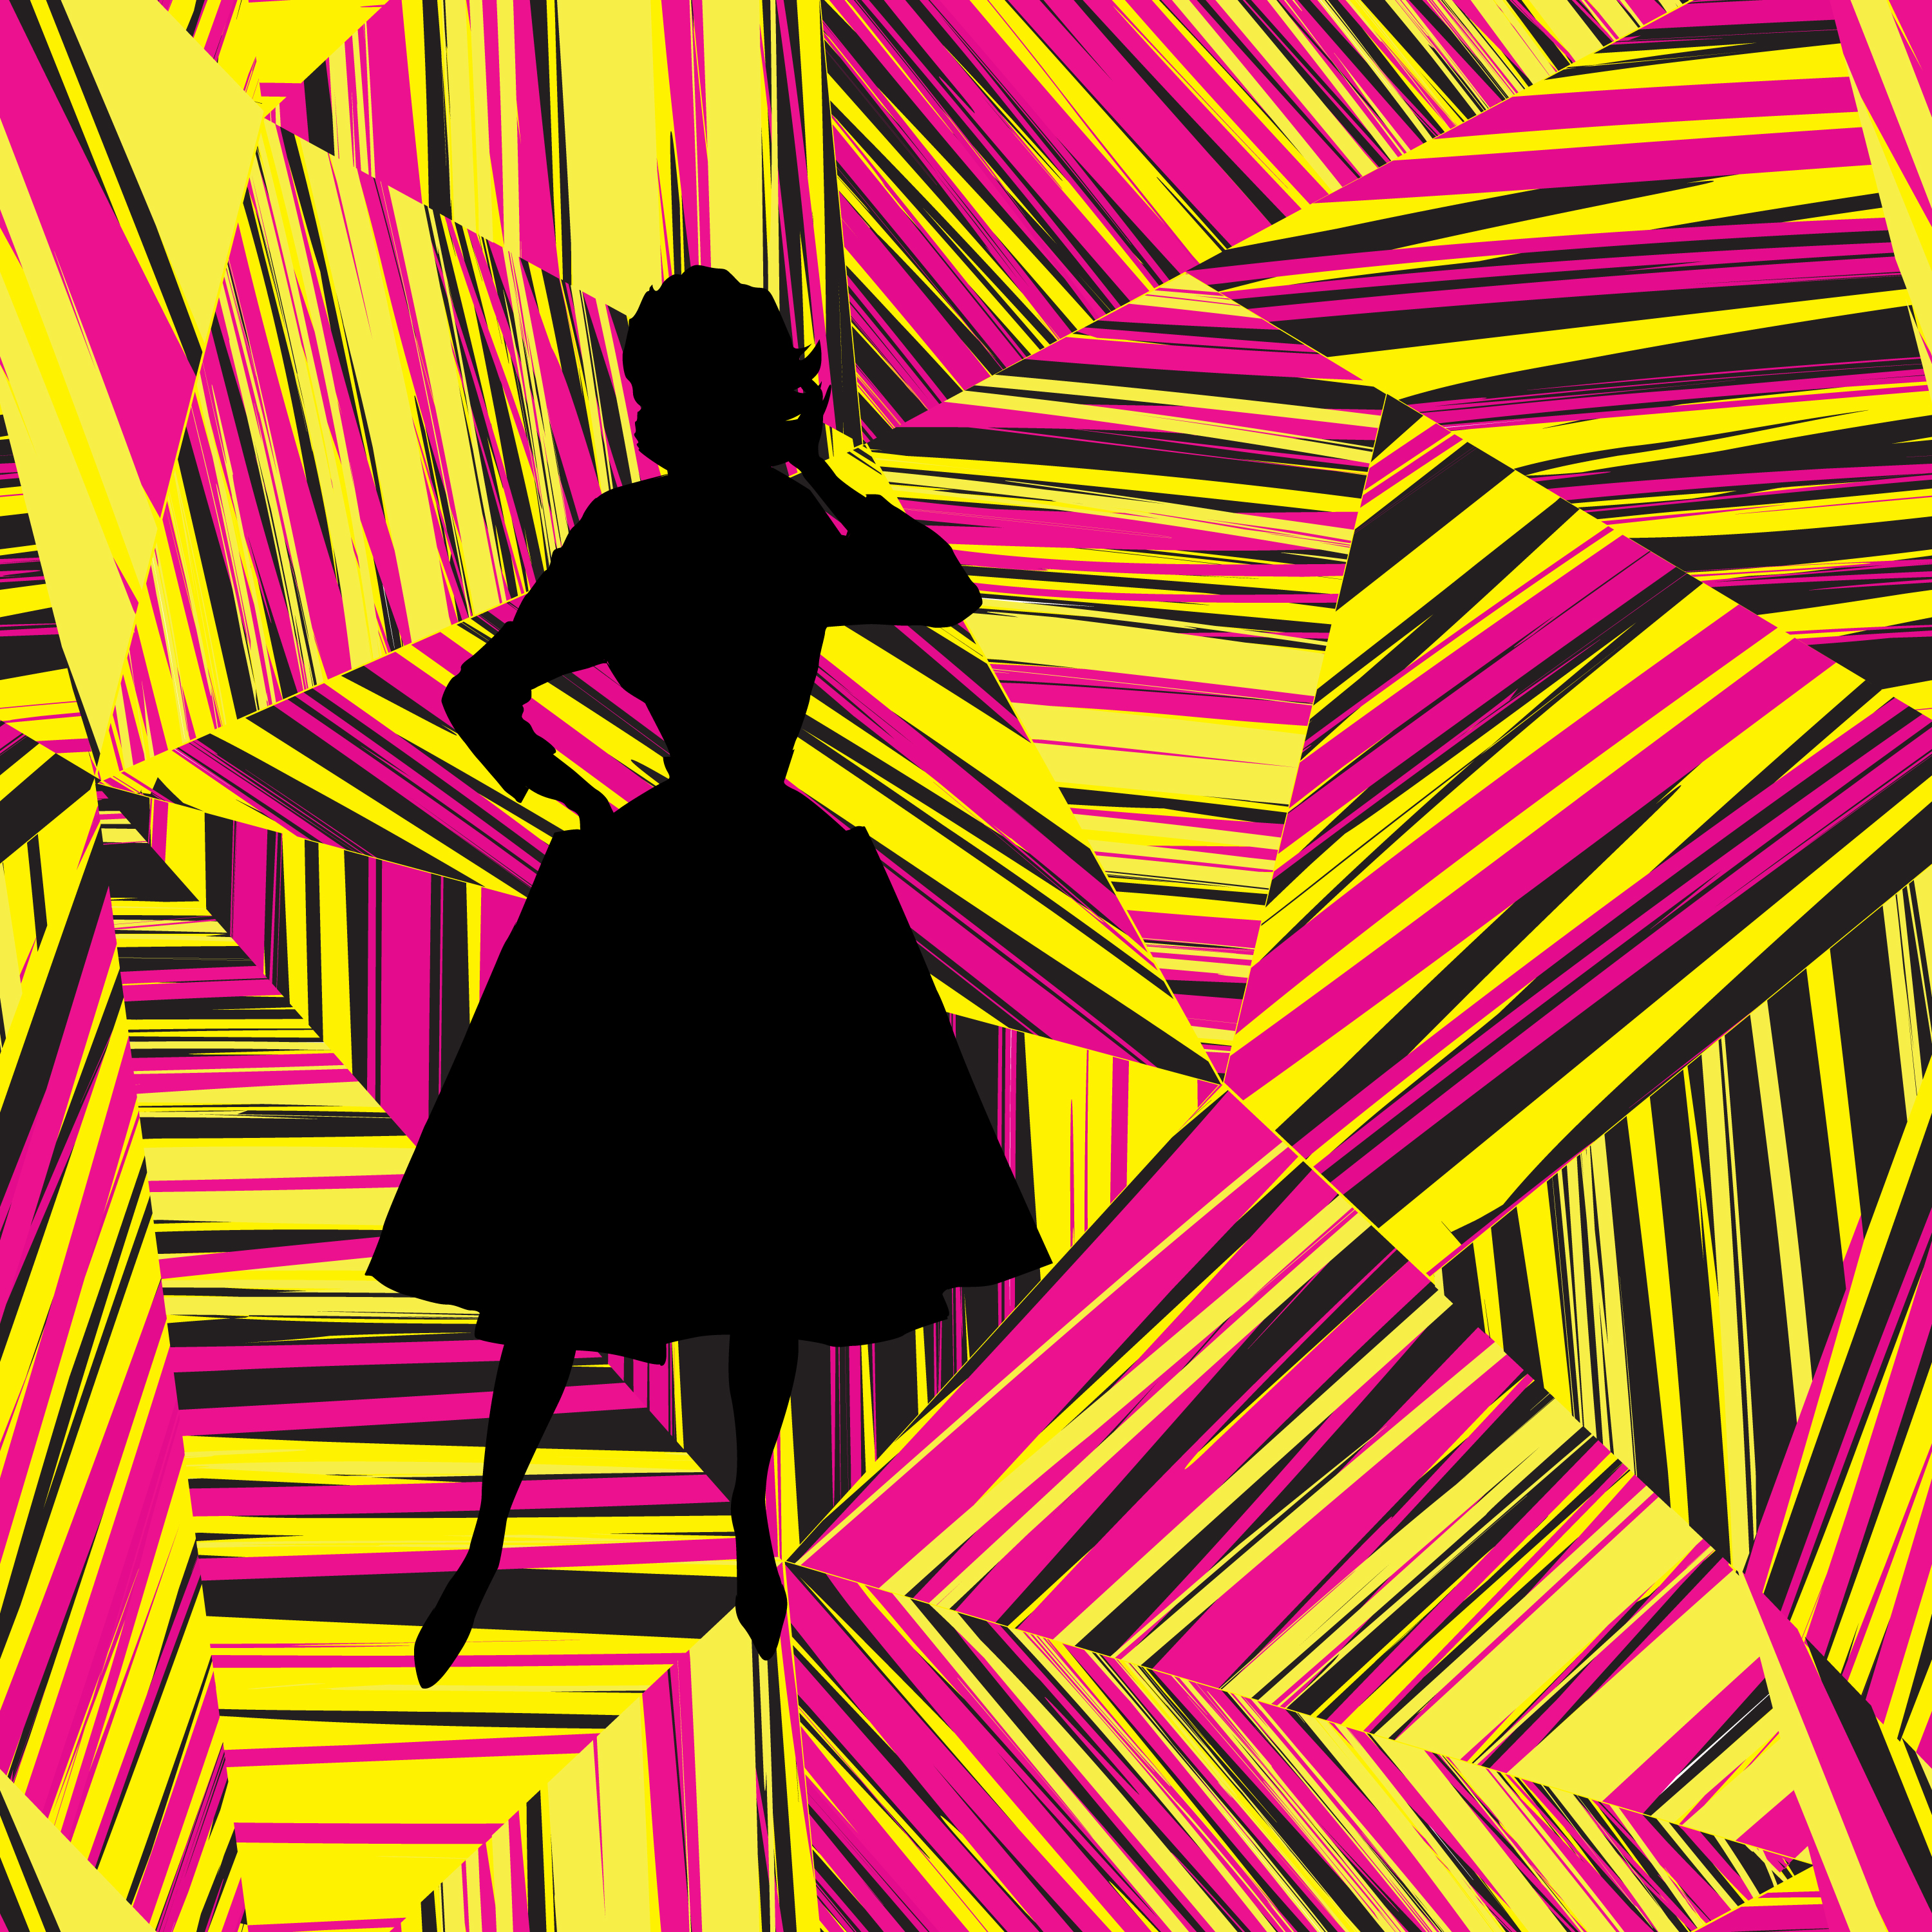  Fashion  girl silhouette over abstract geometric line 